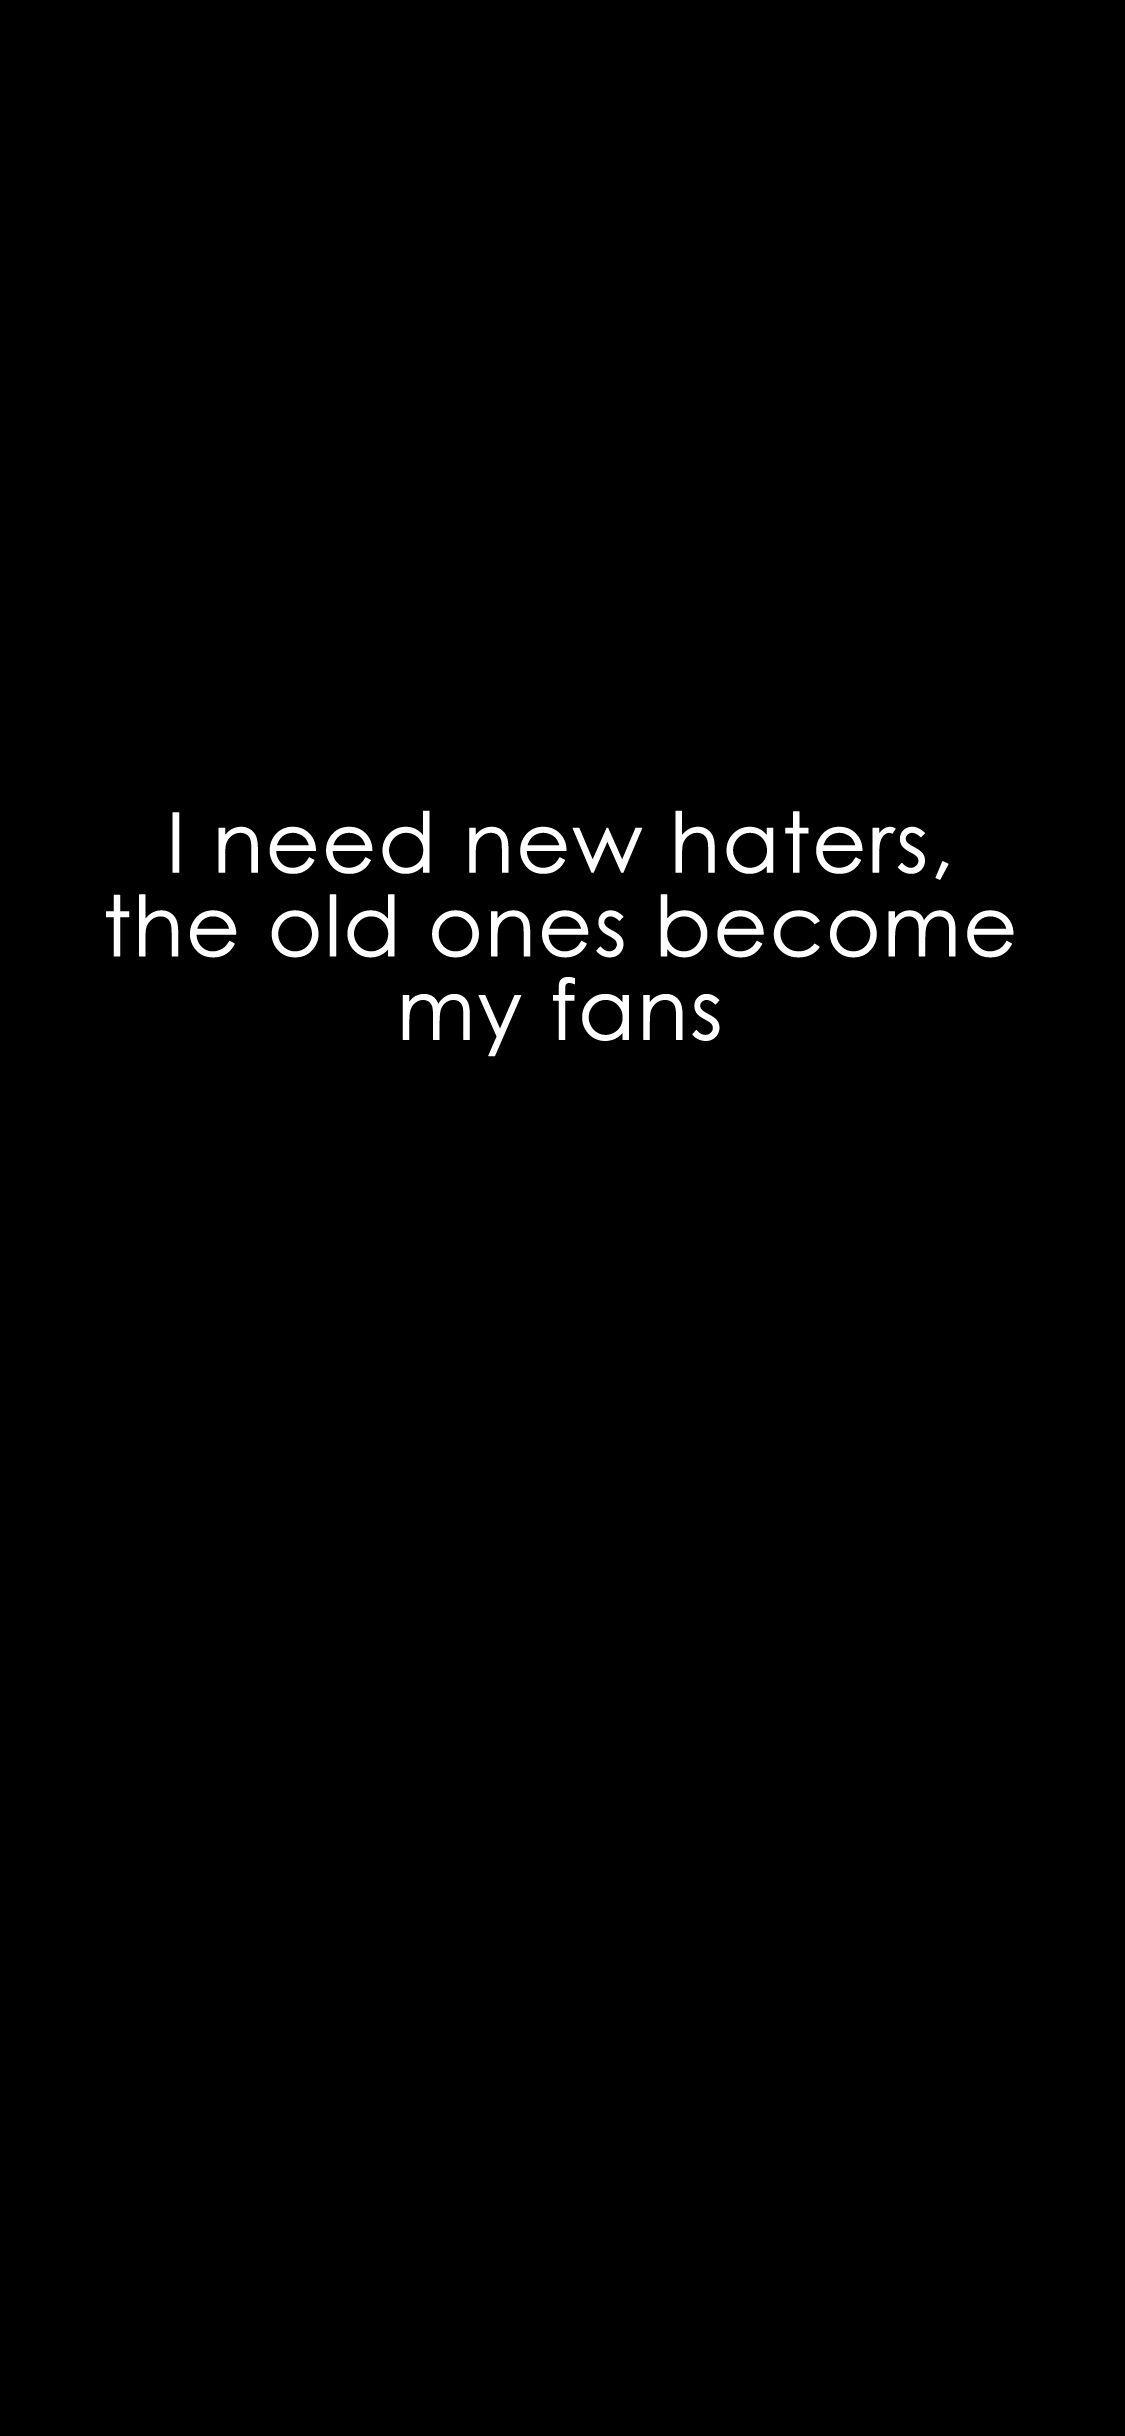 I need new haters, old ones become my fans. #iPhoneX #Wallpaper